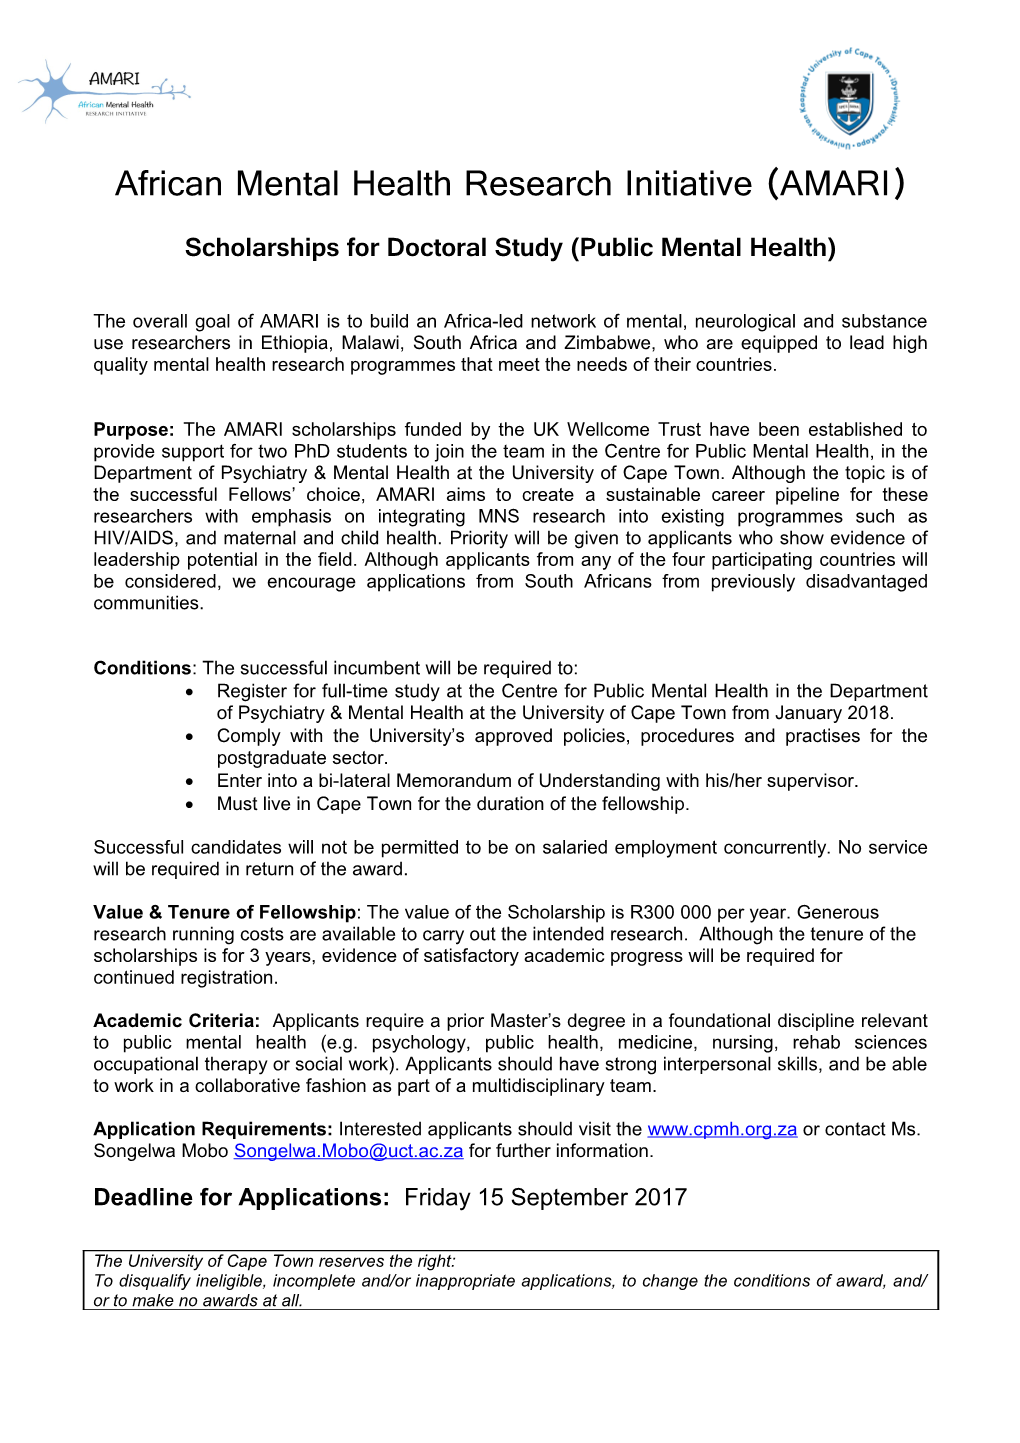 Scholarships for Doctoral Study (Public Mental Health)